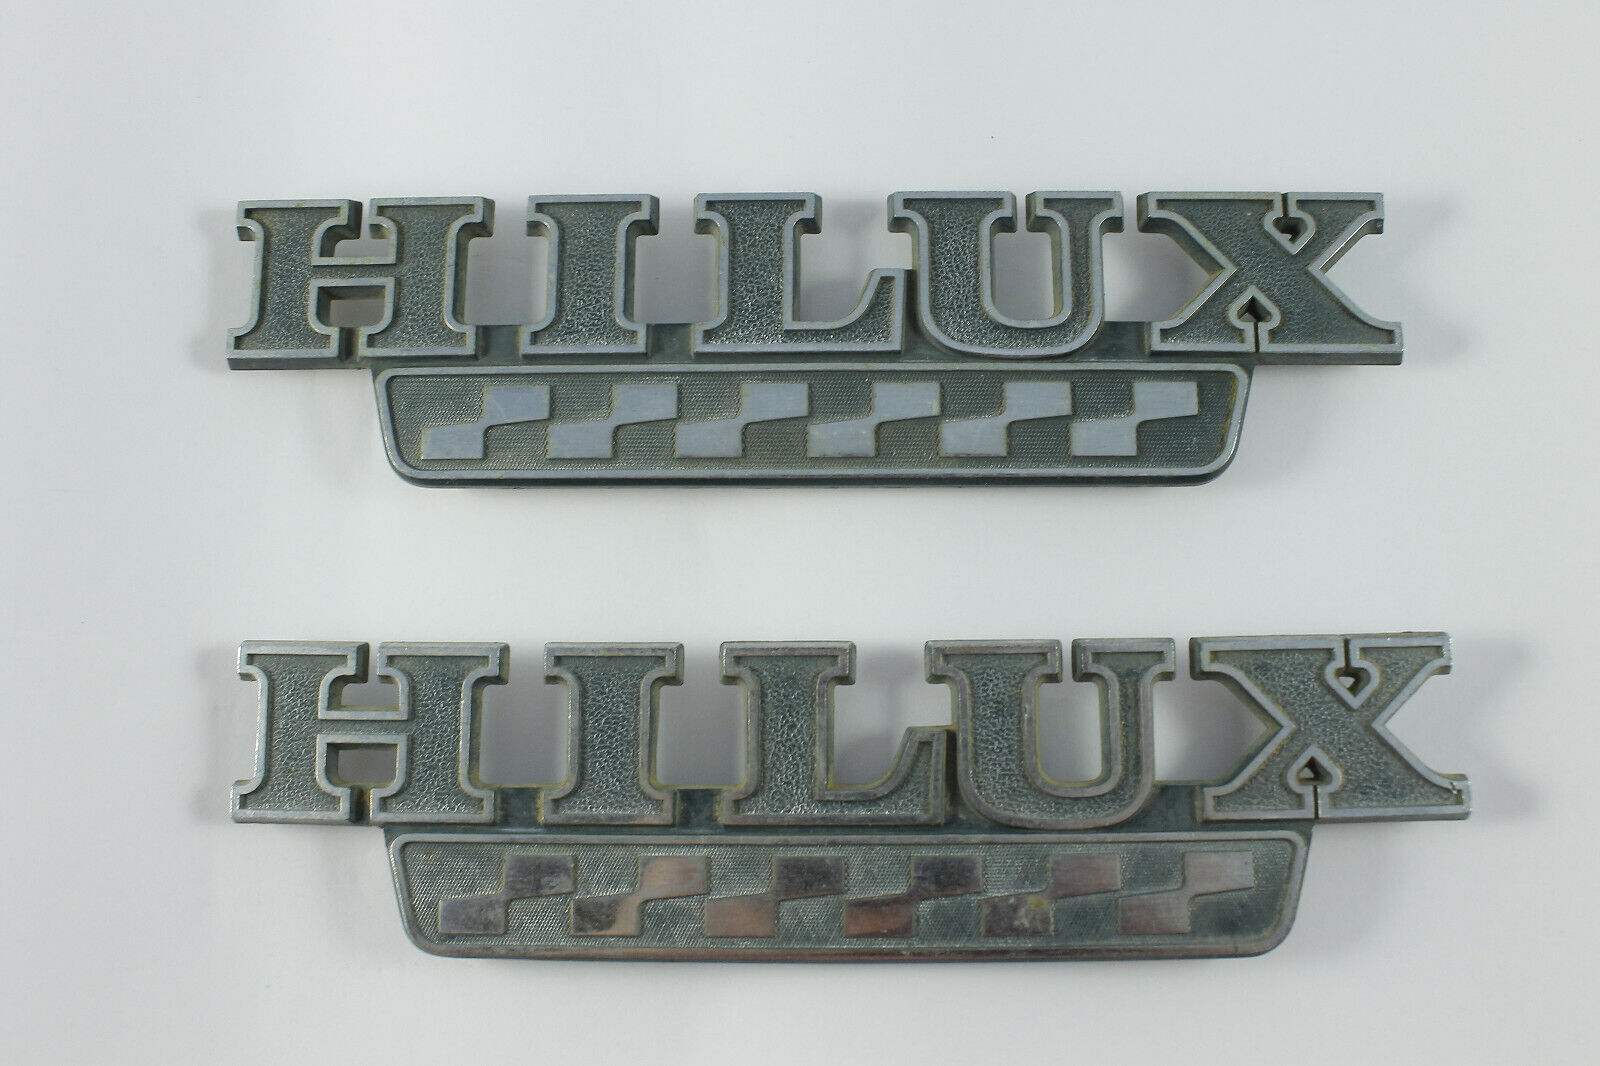 Original Pair of Toyota Hilux Pickup Front Fender Emblems, Good Cond.